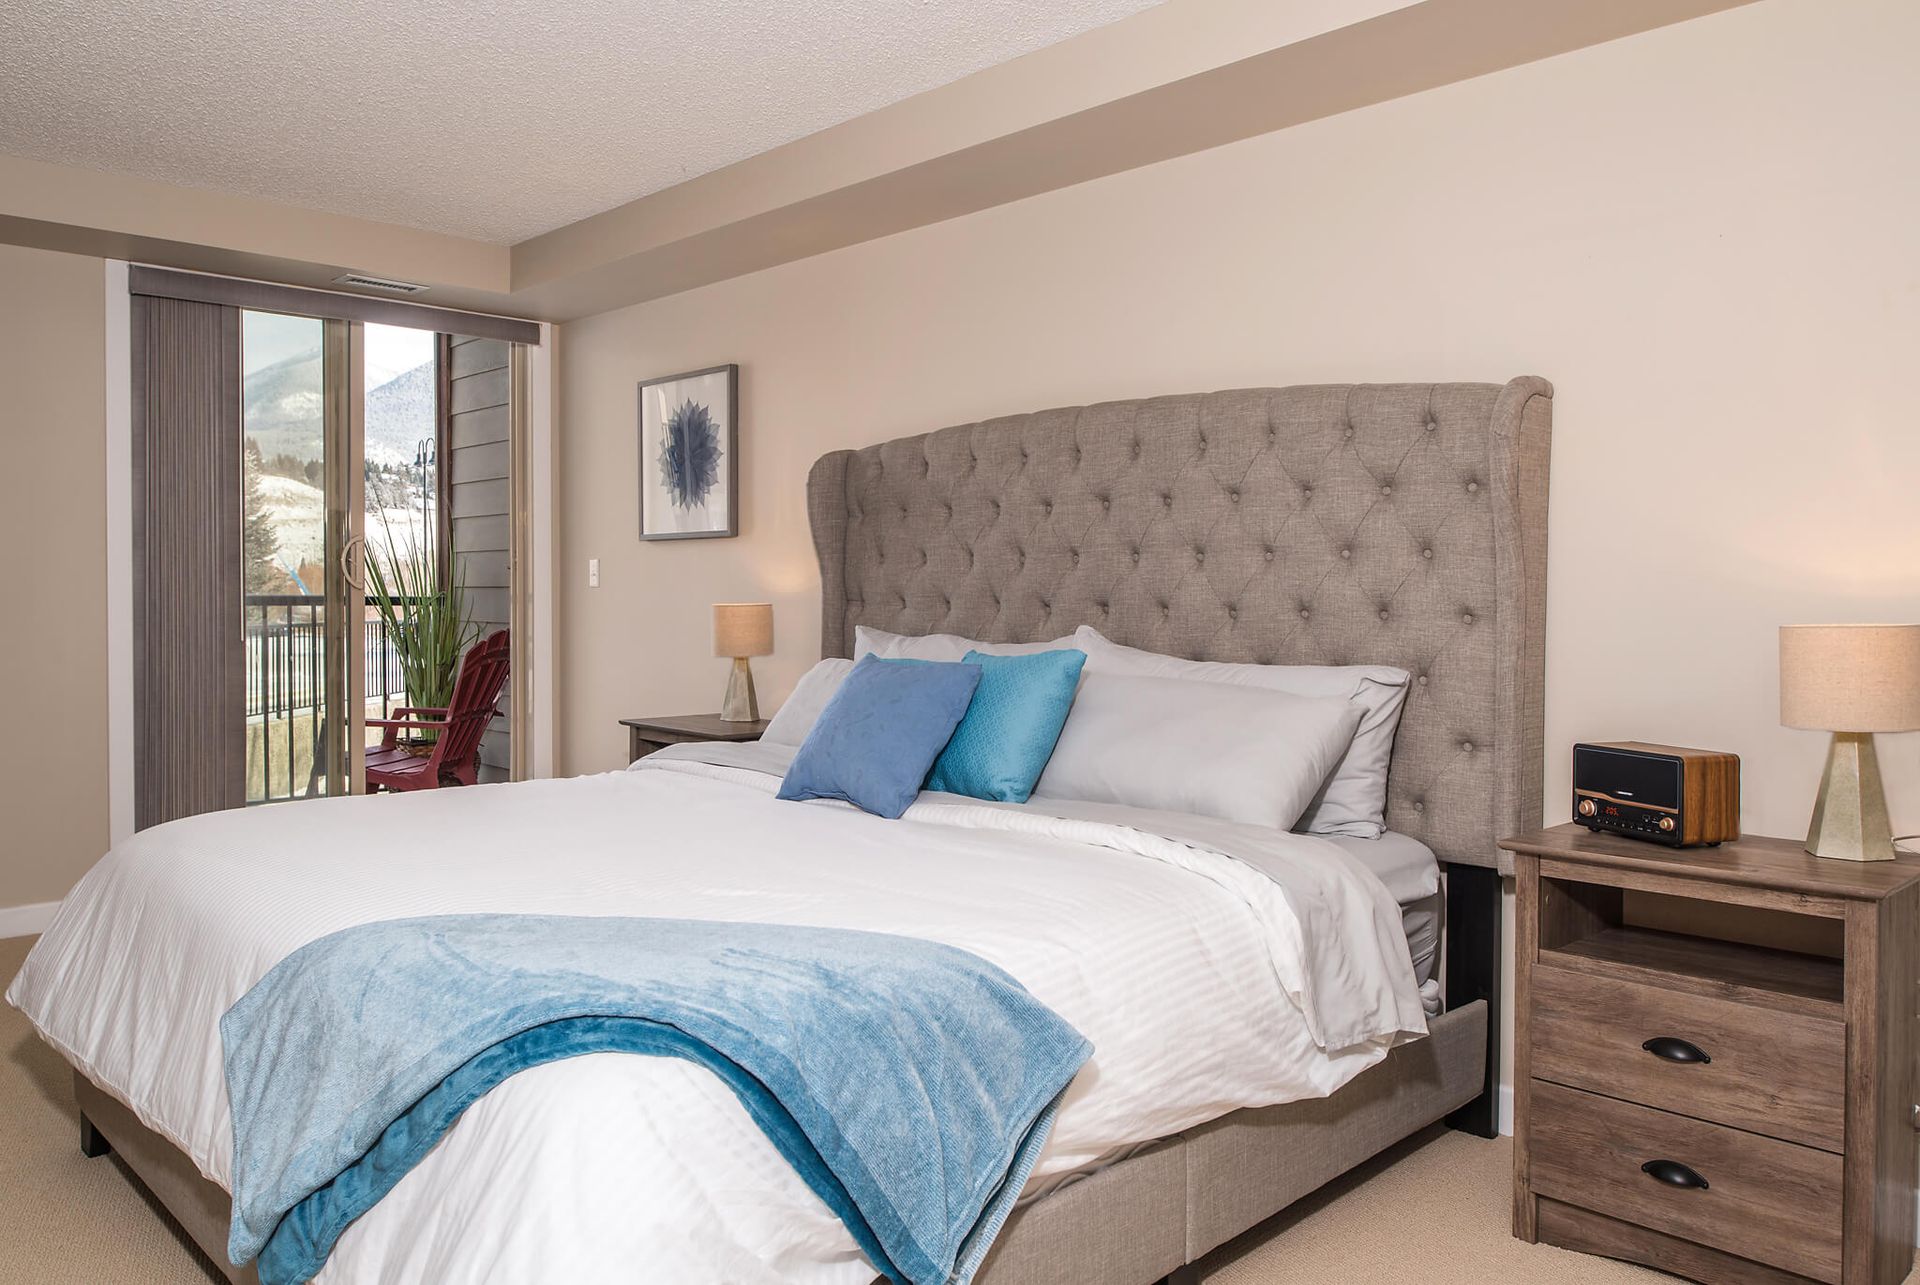 Primary bedroom of the Sapphire Serenity, a BC Vacation Rental hosted by Aisling Baile Property Management.